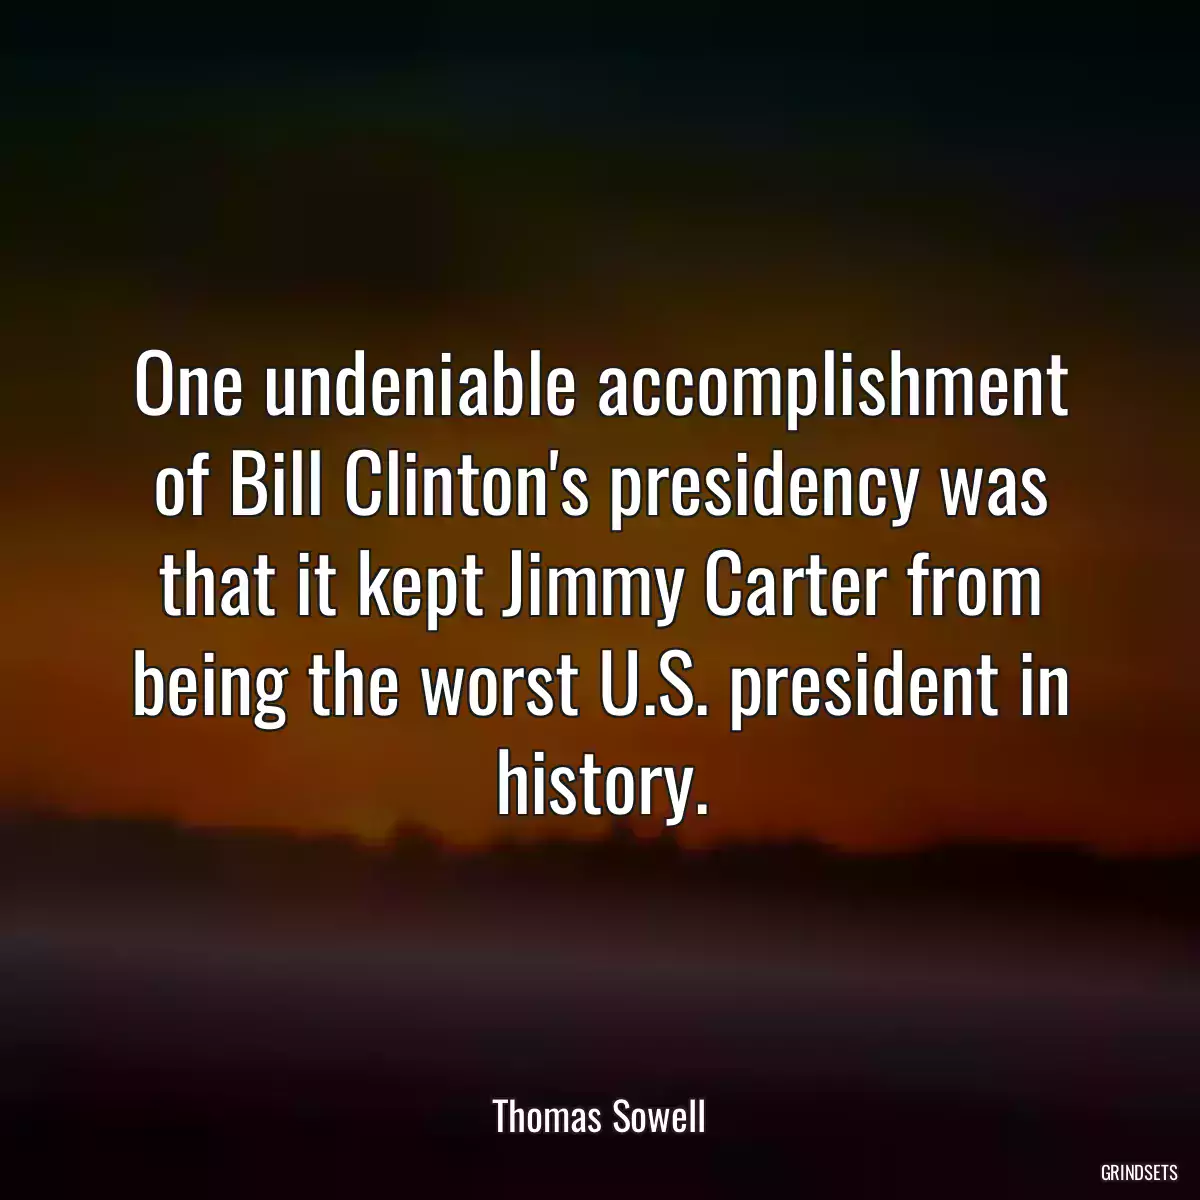 One undeniable accomplishment of Bill Clinton\'s presidency was that it kept Jimmy Carter from being the worst U.S. president in history.